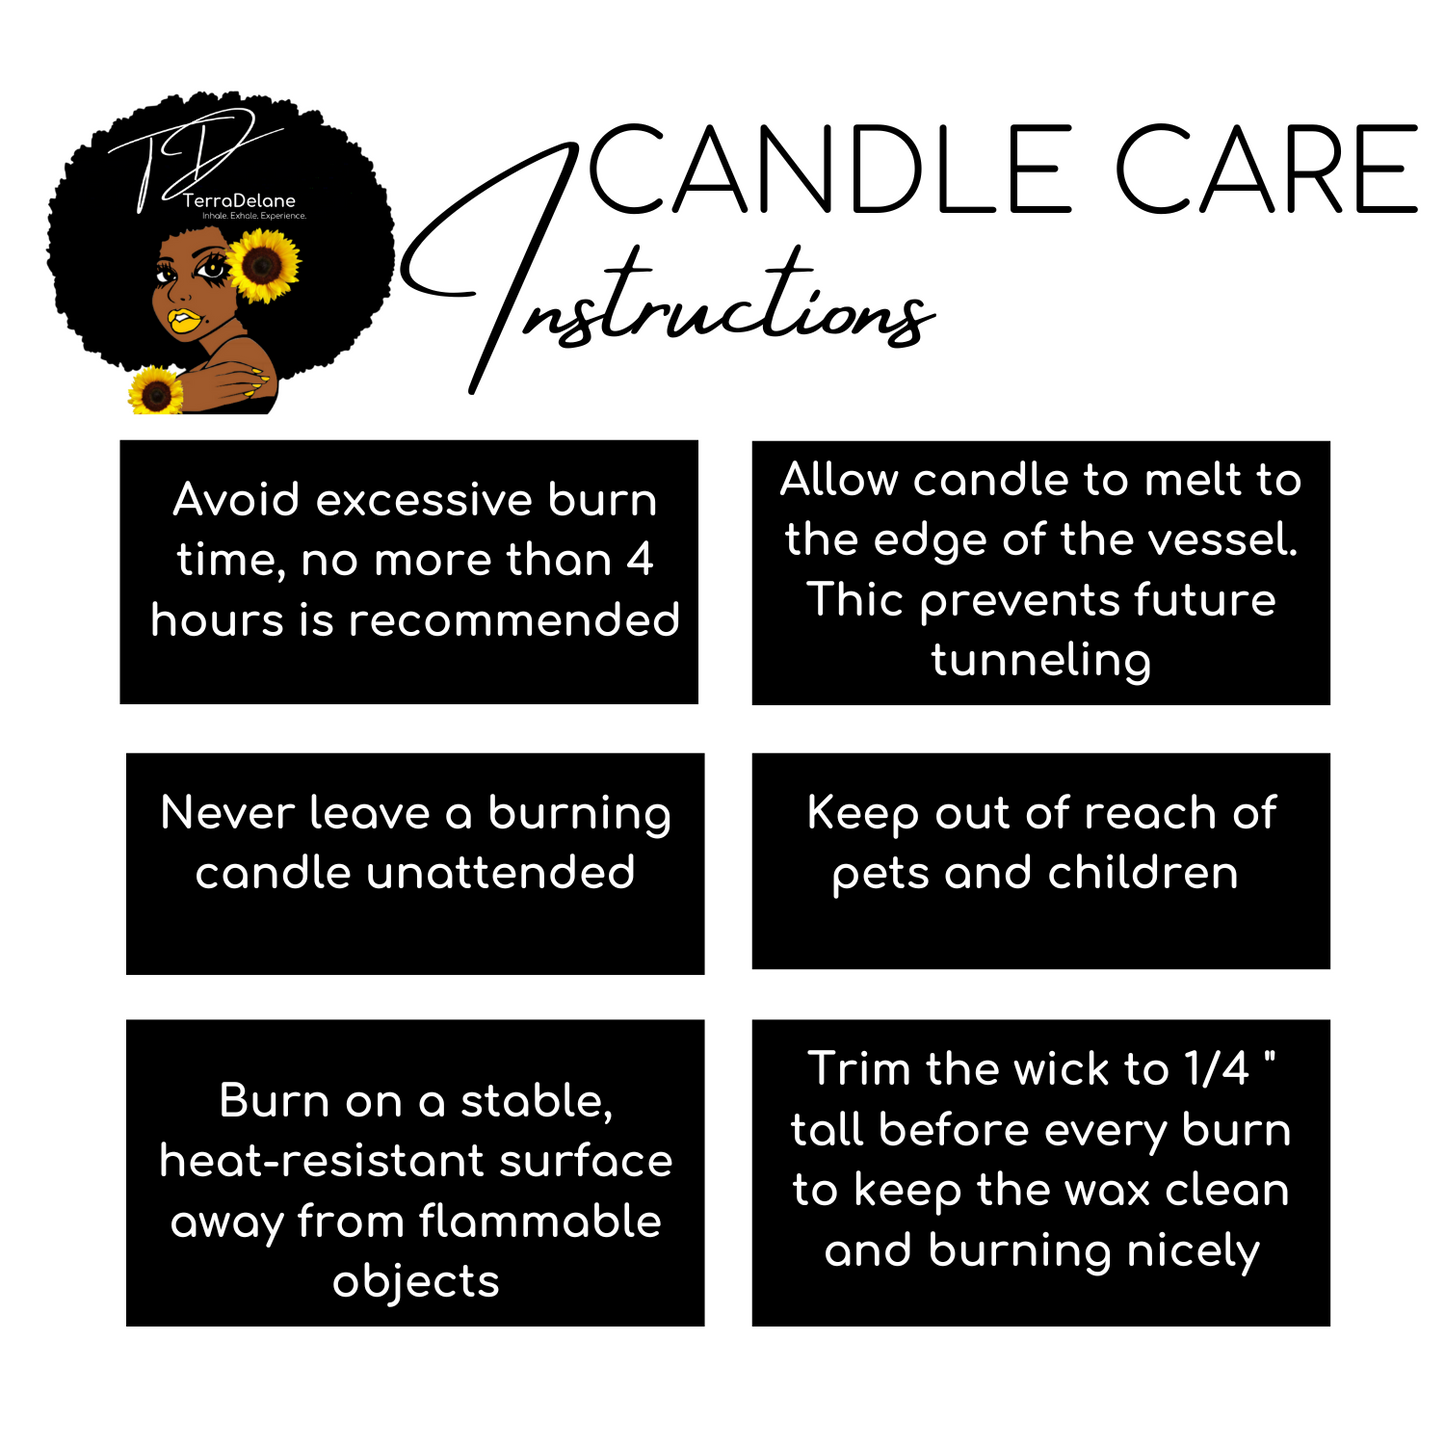 Candle Care Instructions